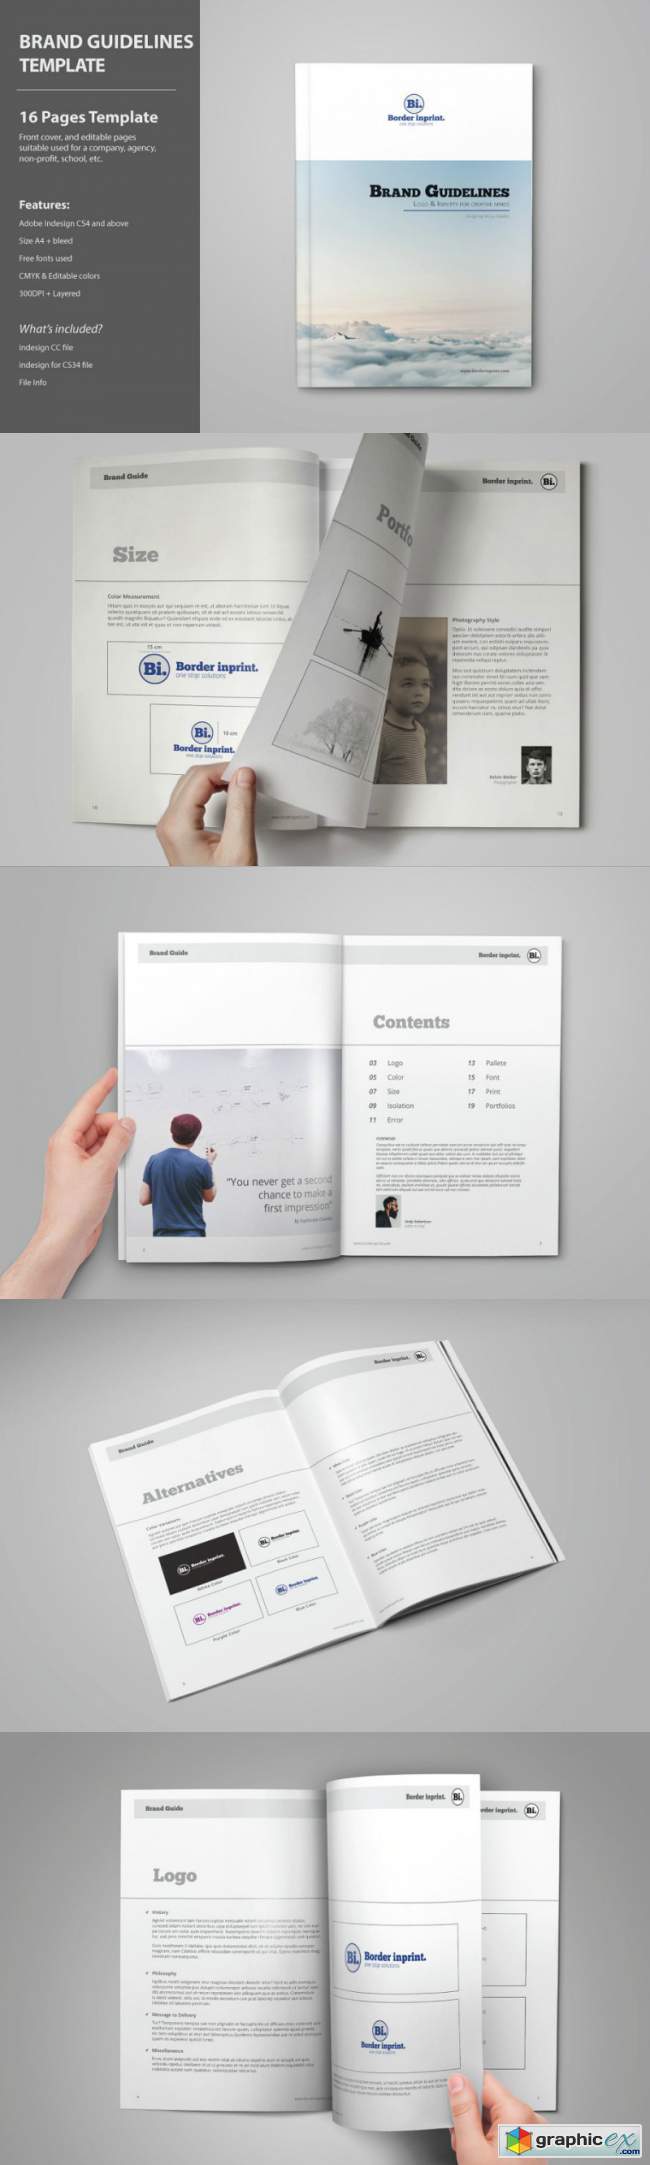 Brand Guidelines Template 3806084